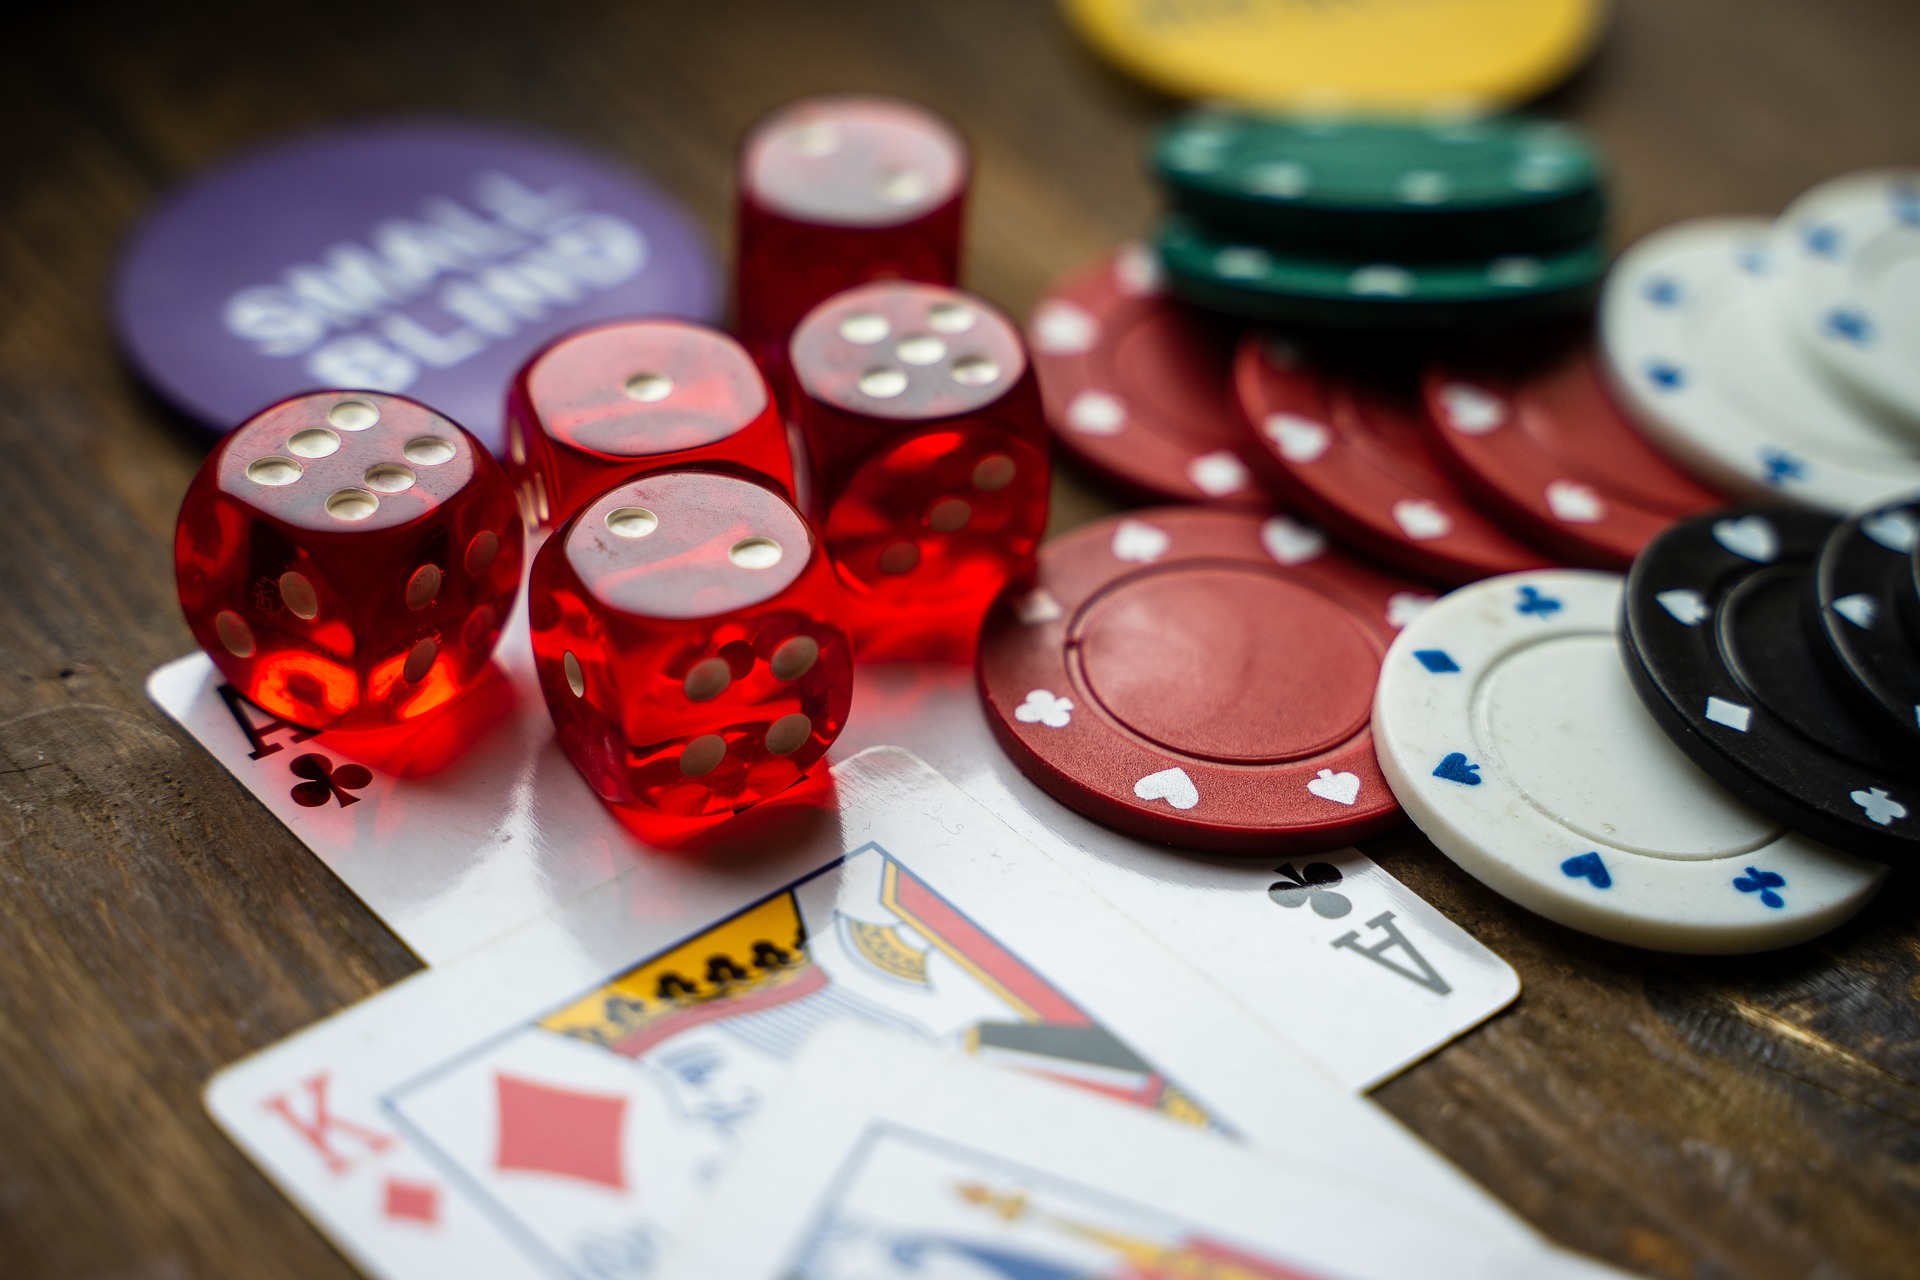 Online Casinos - Risks and Preventions